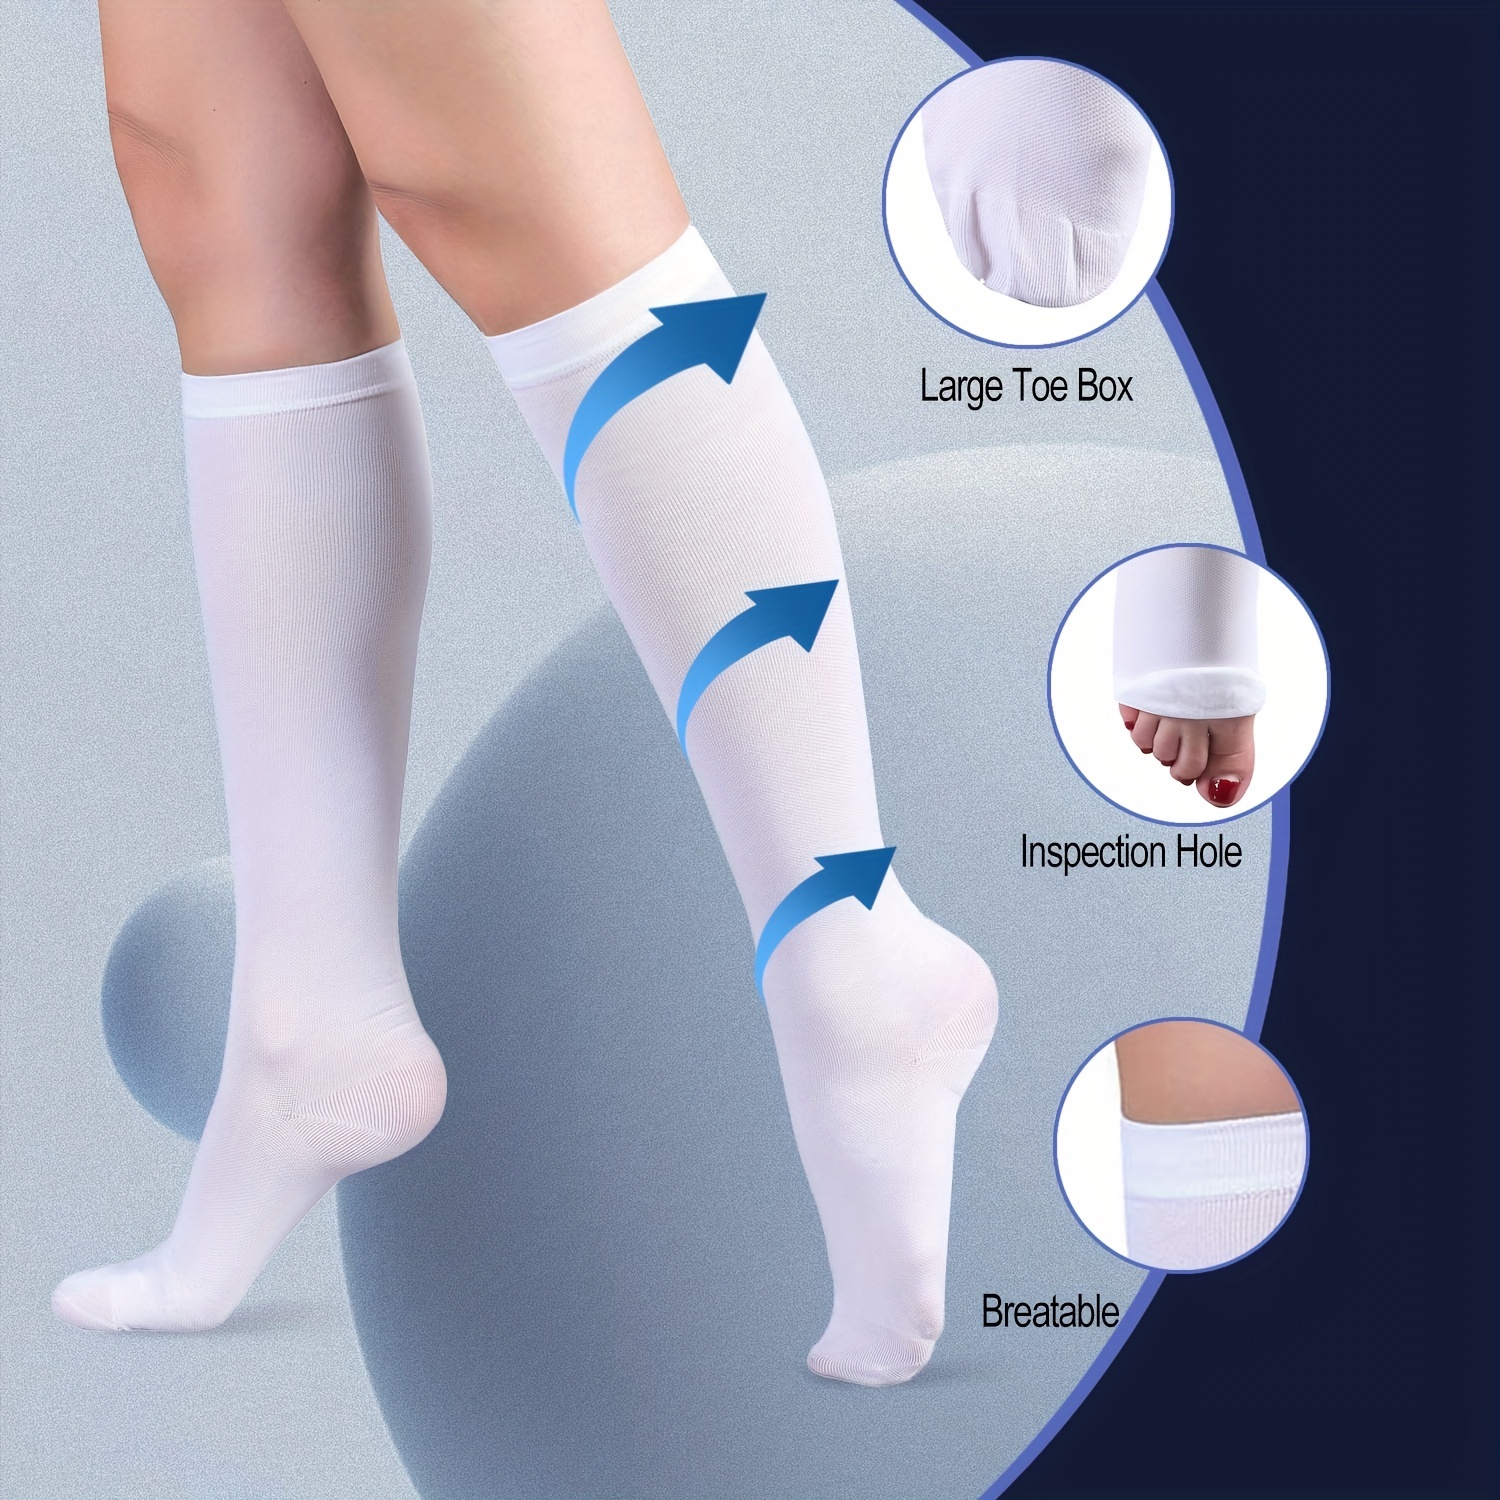 930 White Anti-Embolism Stockings Open Toe Calf & Thigh High with